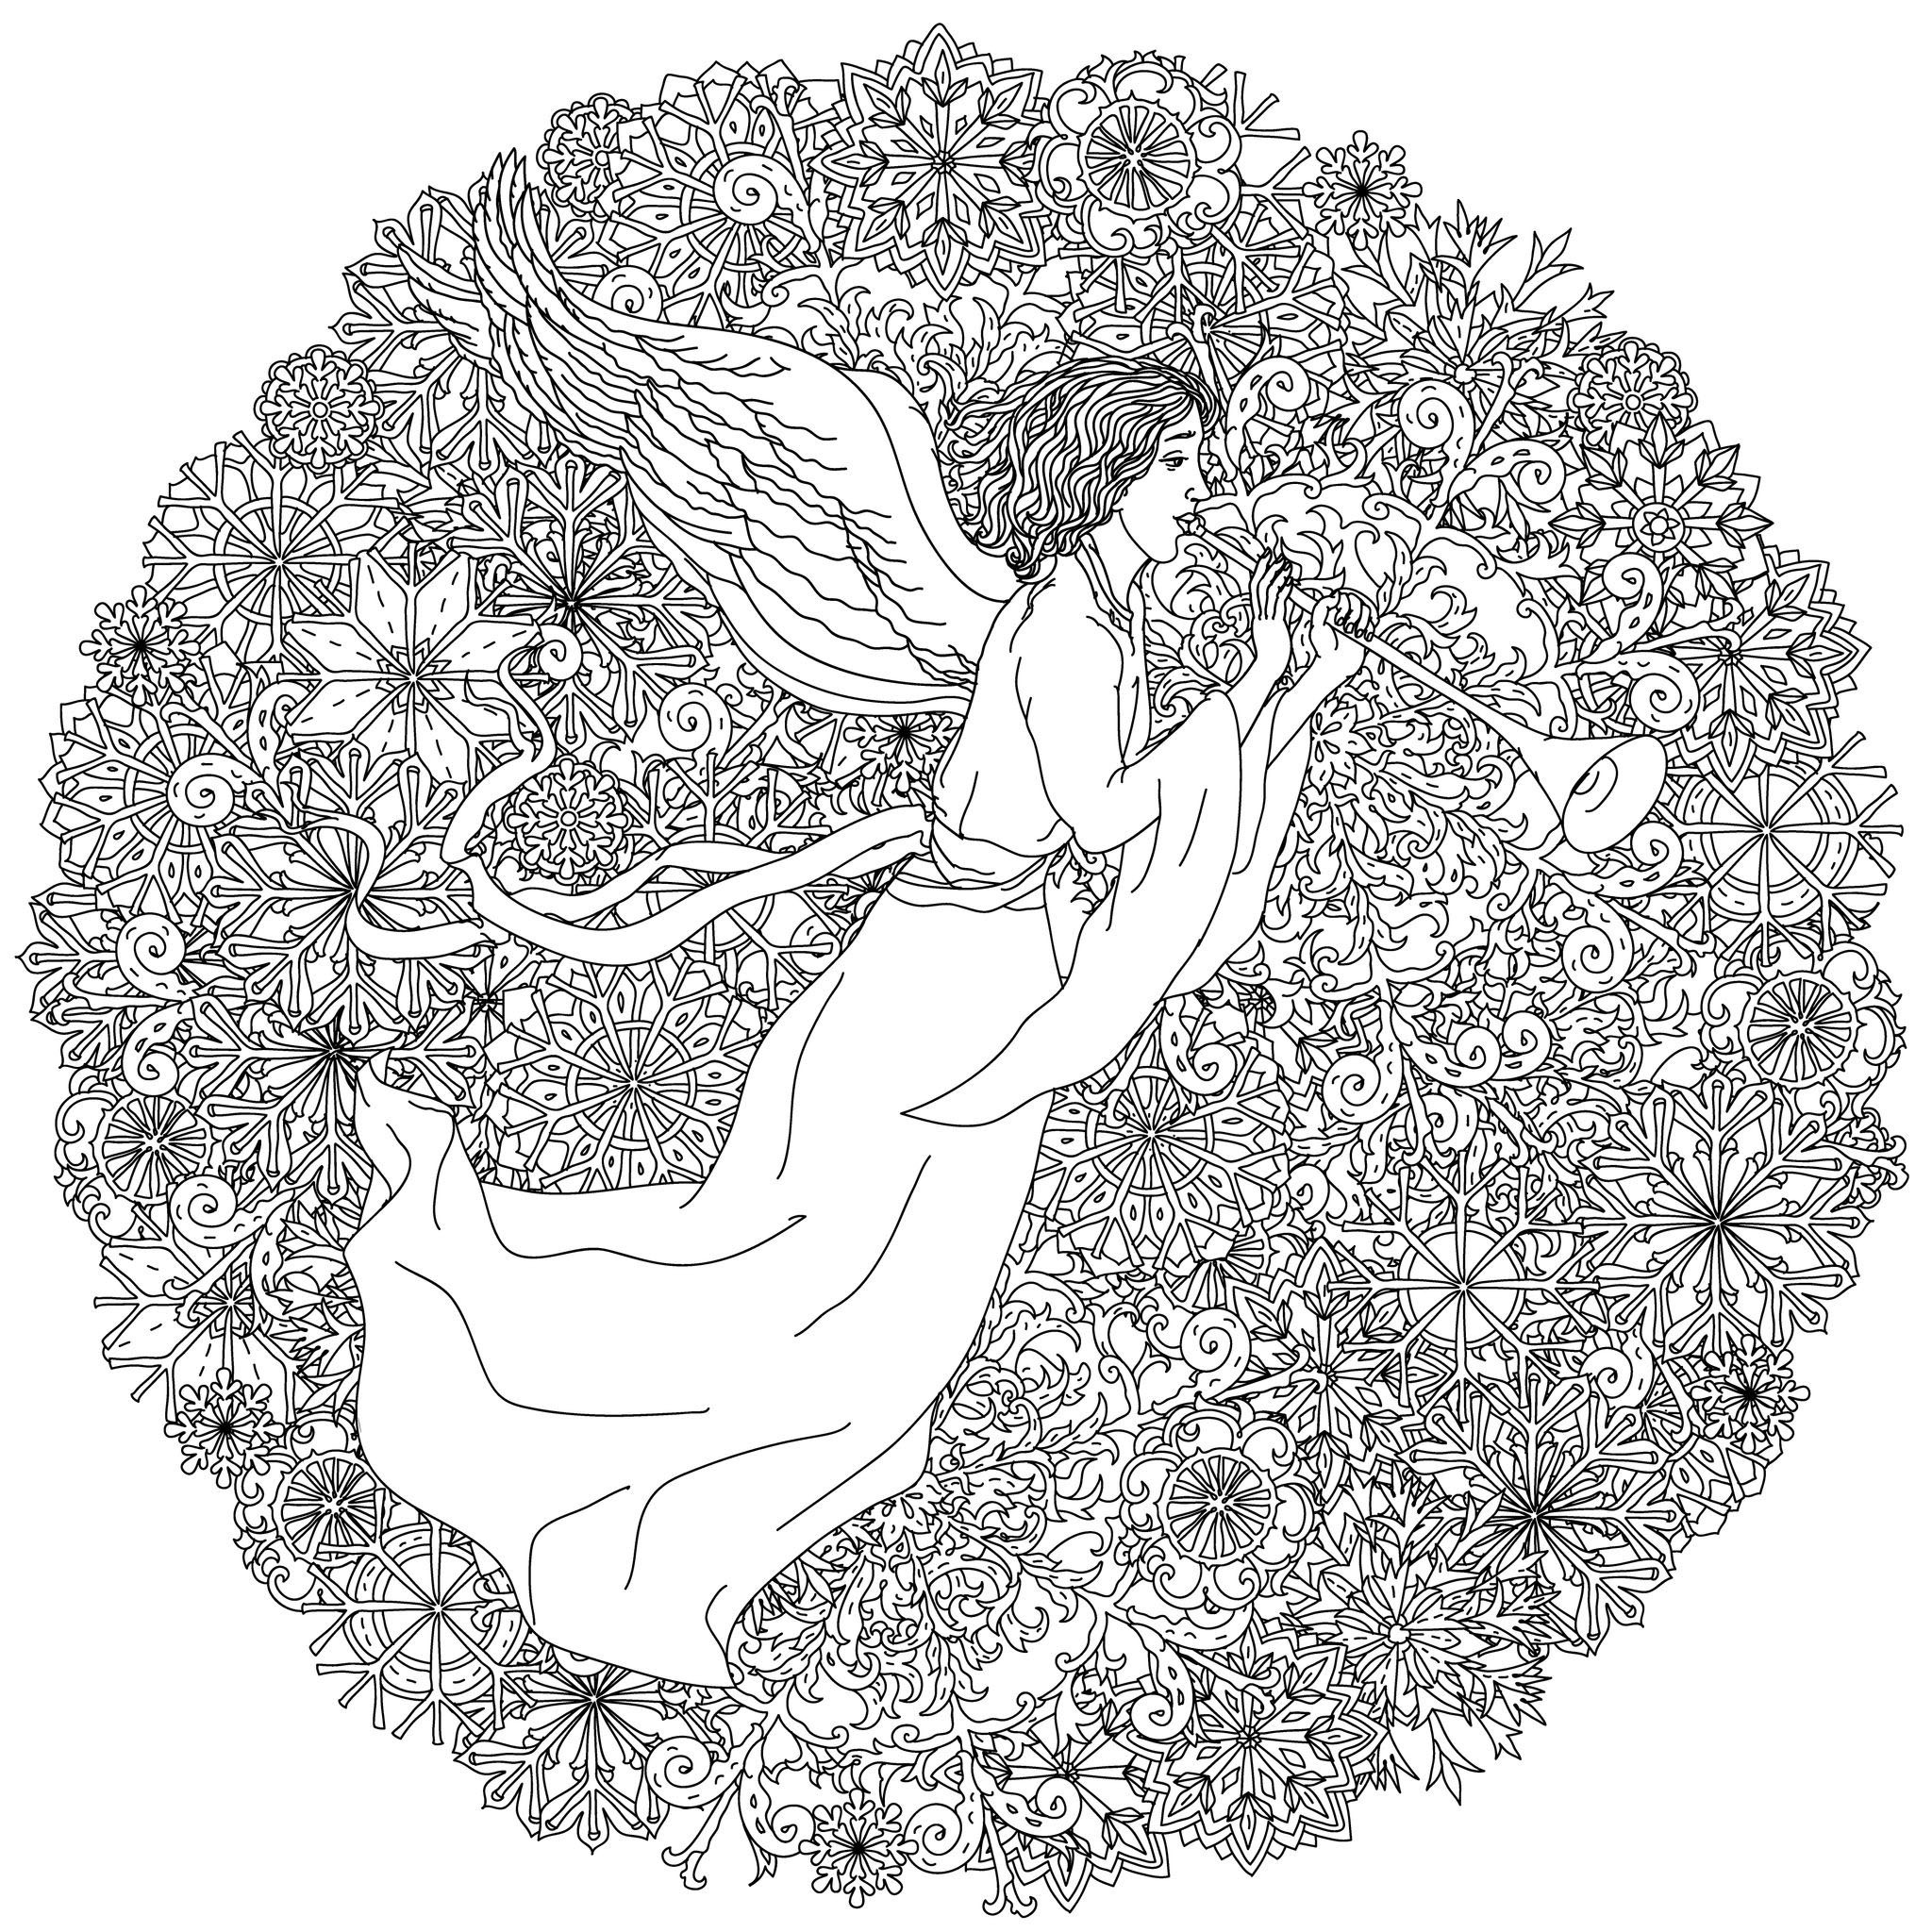 Angel In The Middle Of Snow Flakes Christmas Adult Coloring Pages